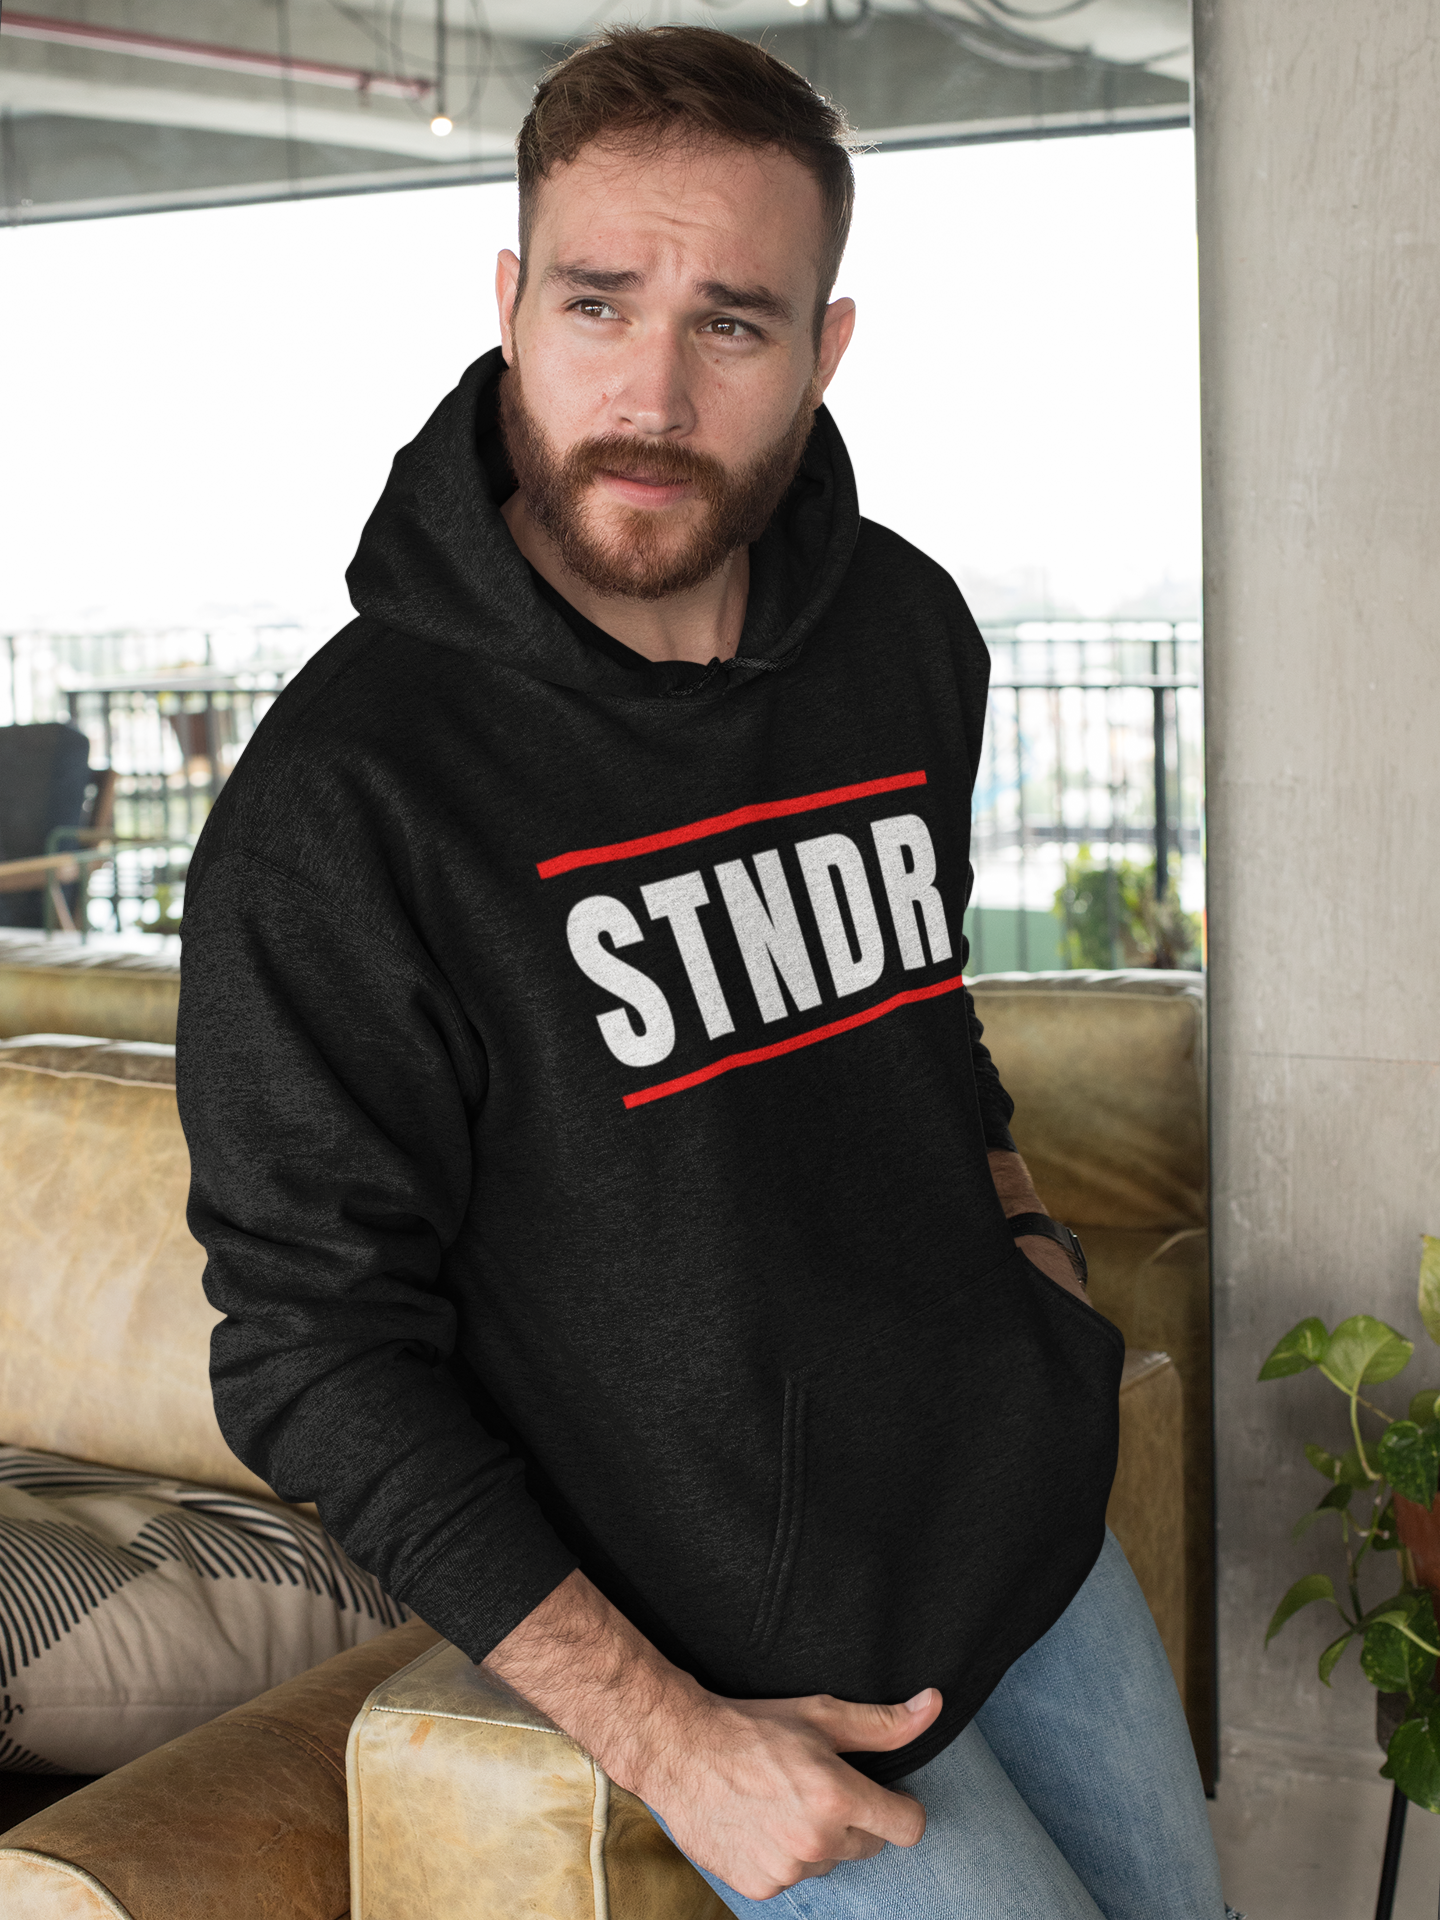 "STNDR" Hoodie (Black & Military Green Available)